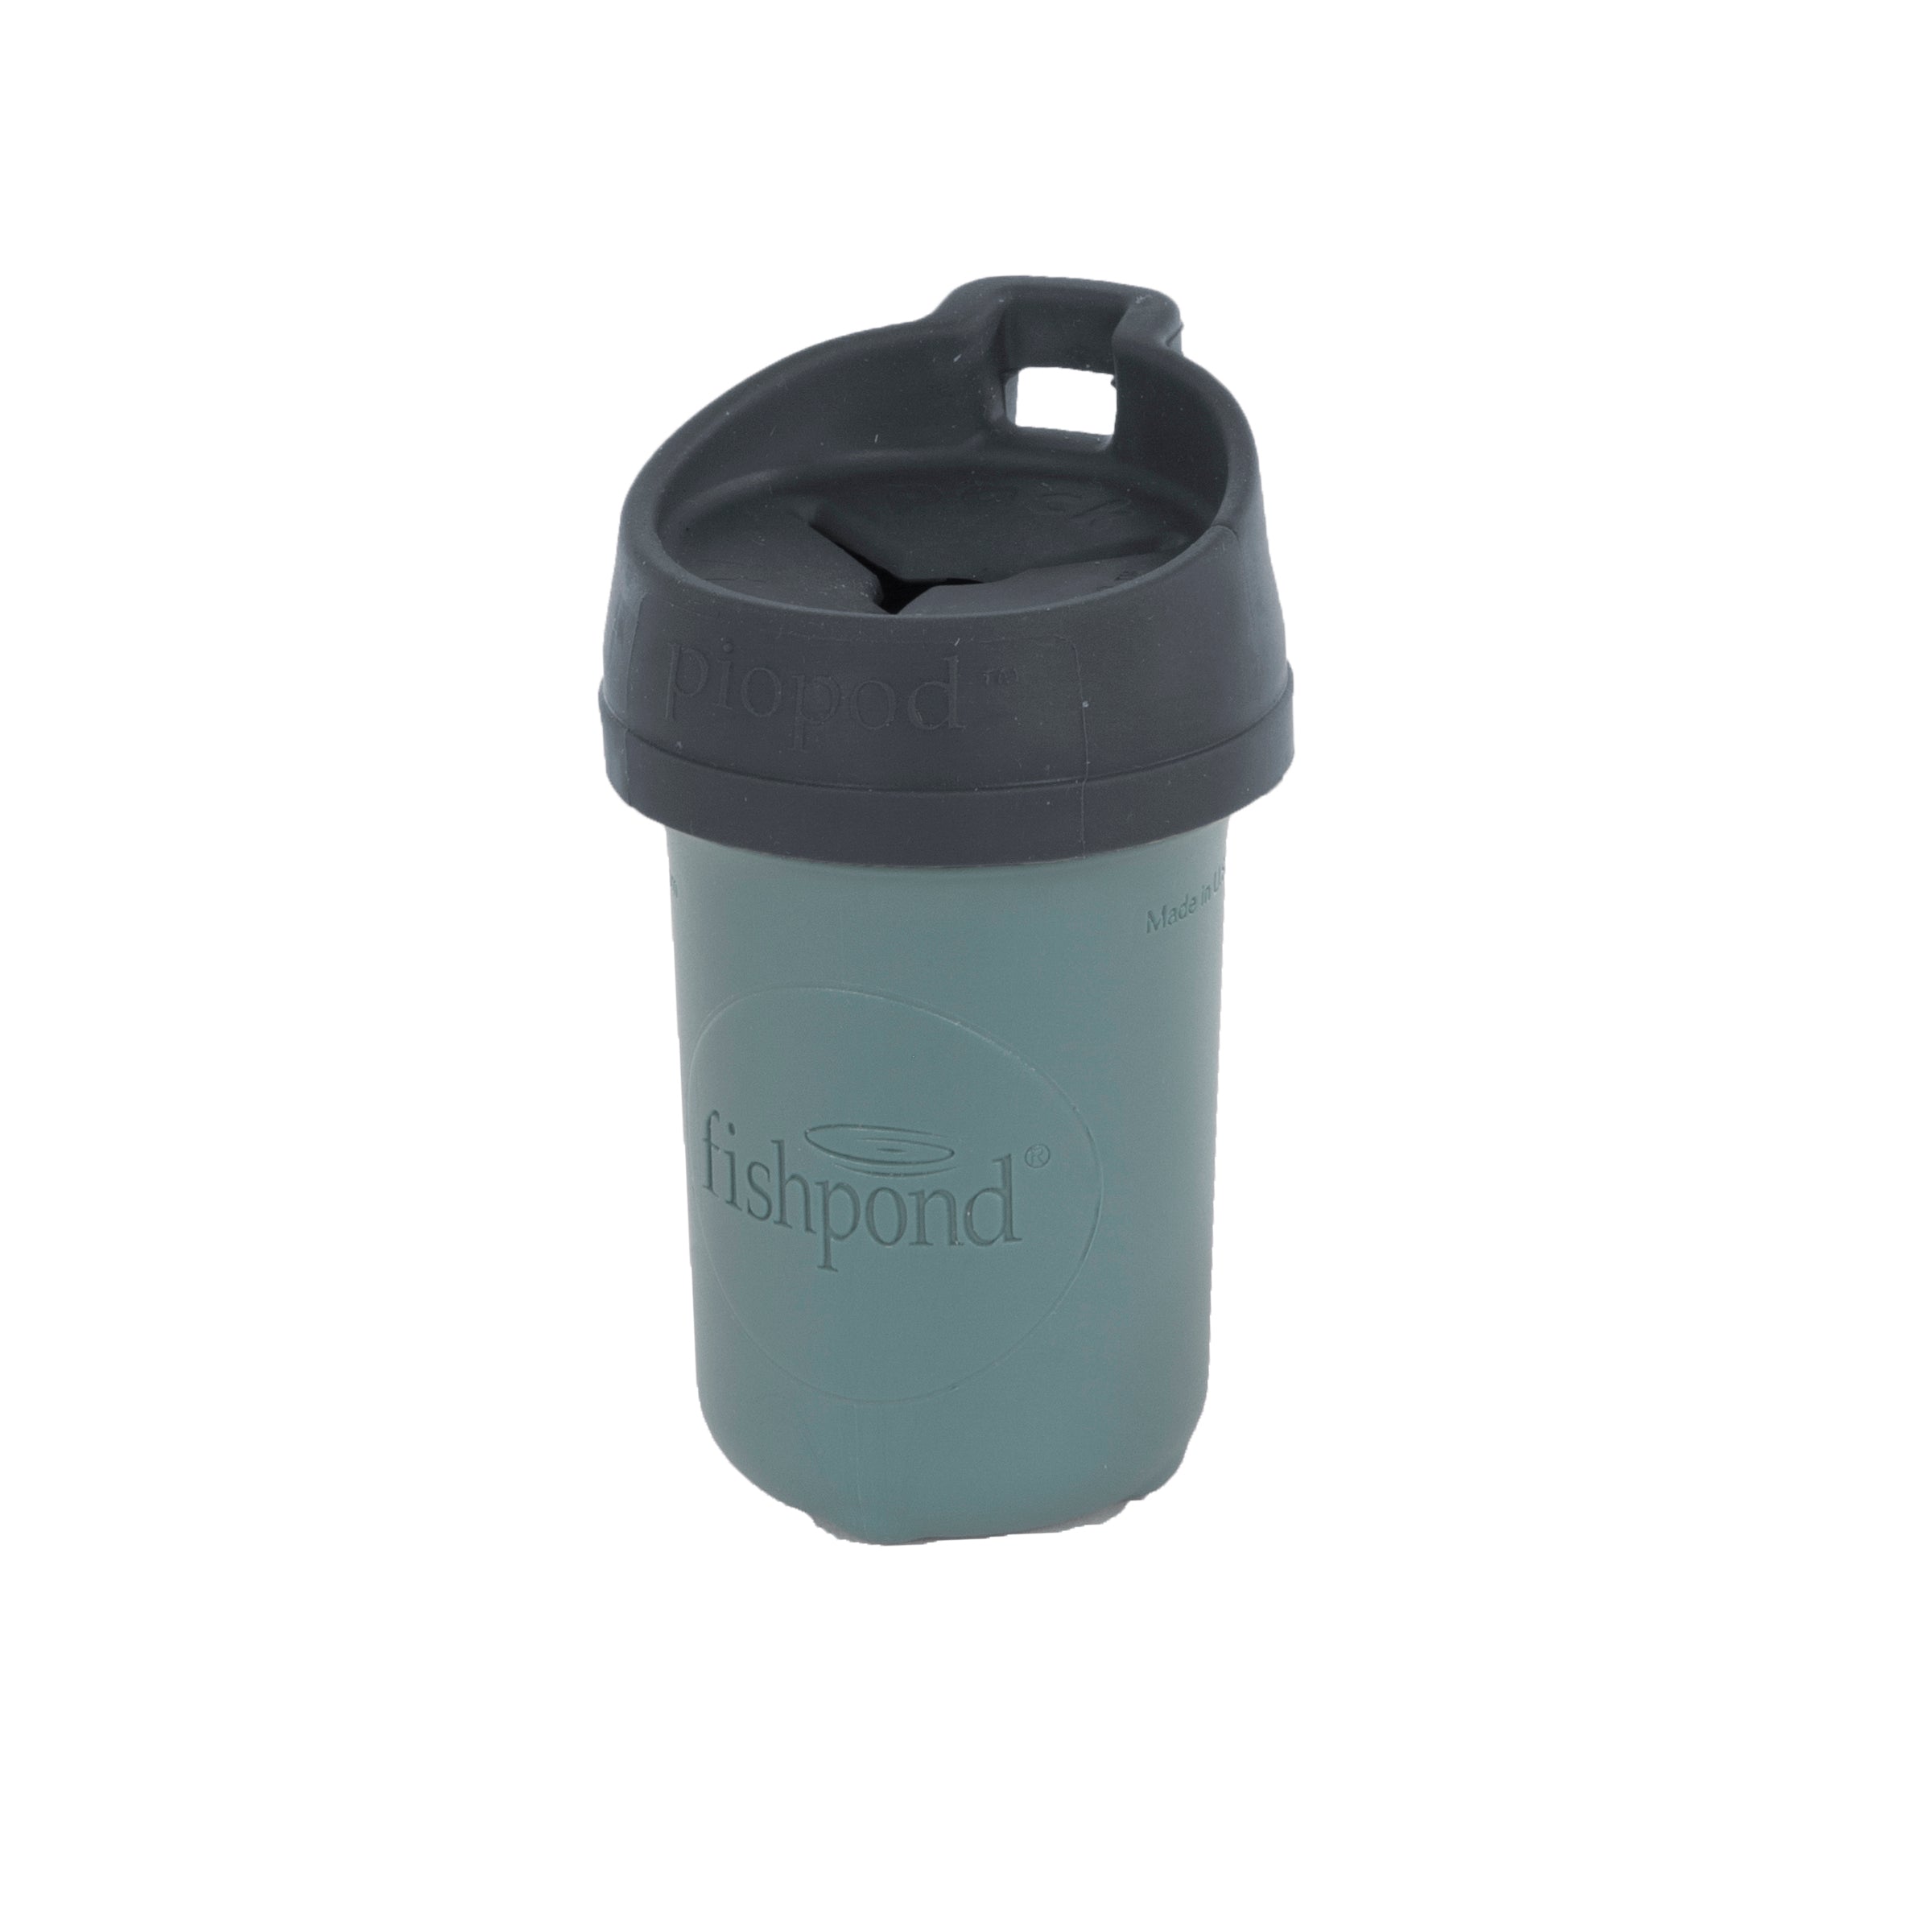 PIOPOD Microtrash Containers – Fishpond